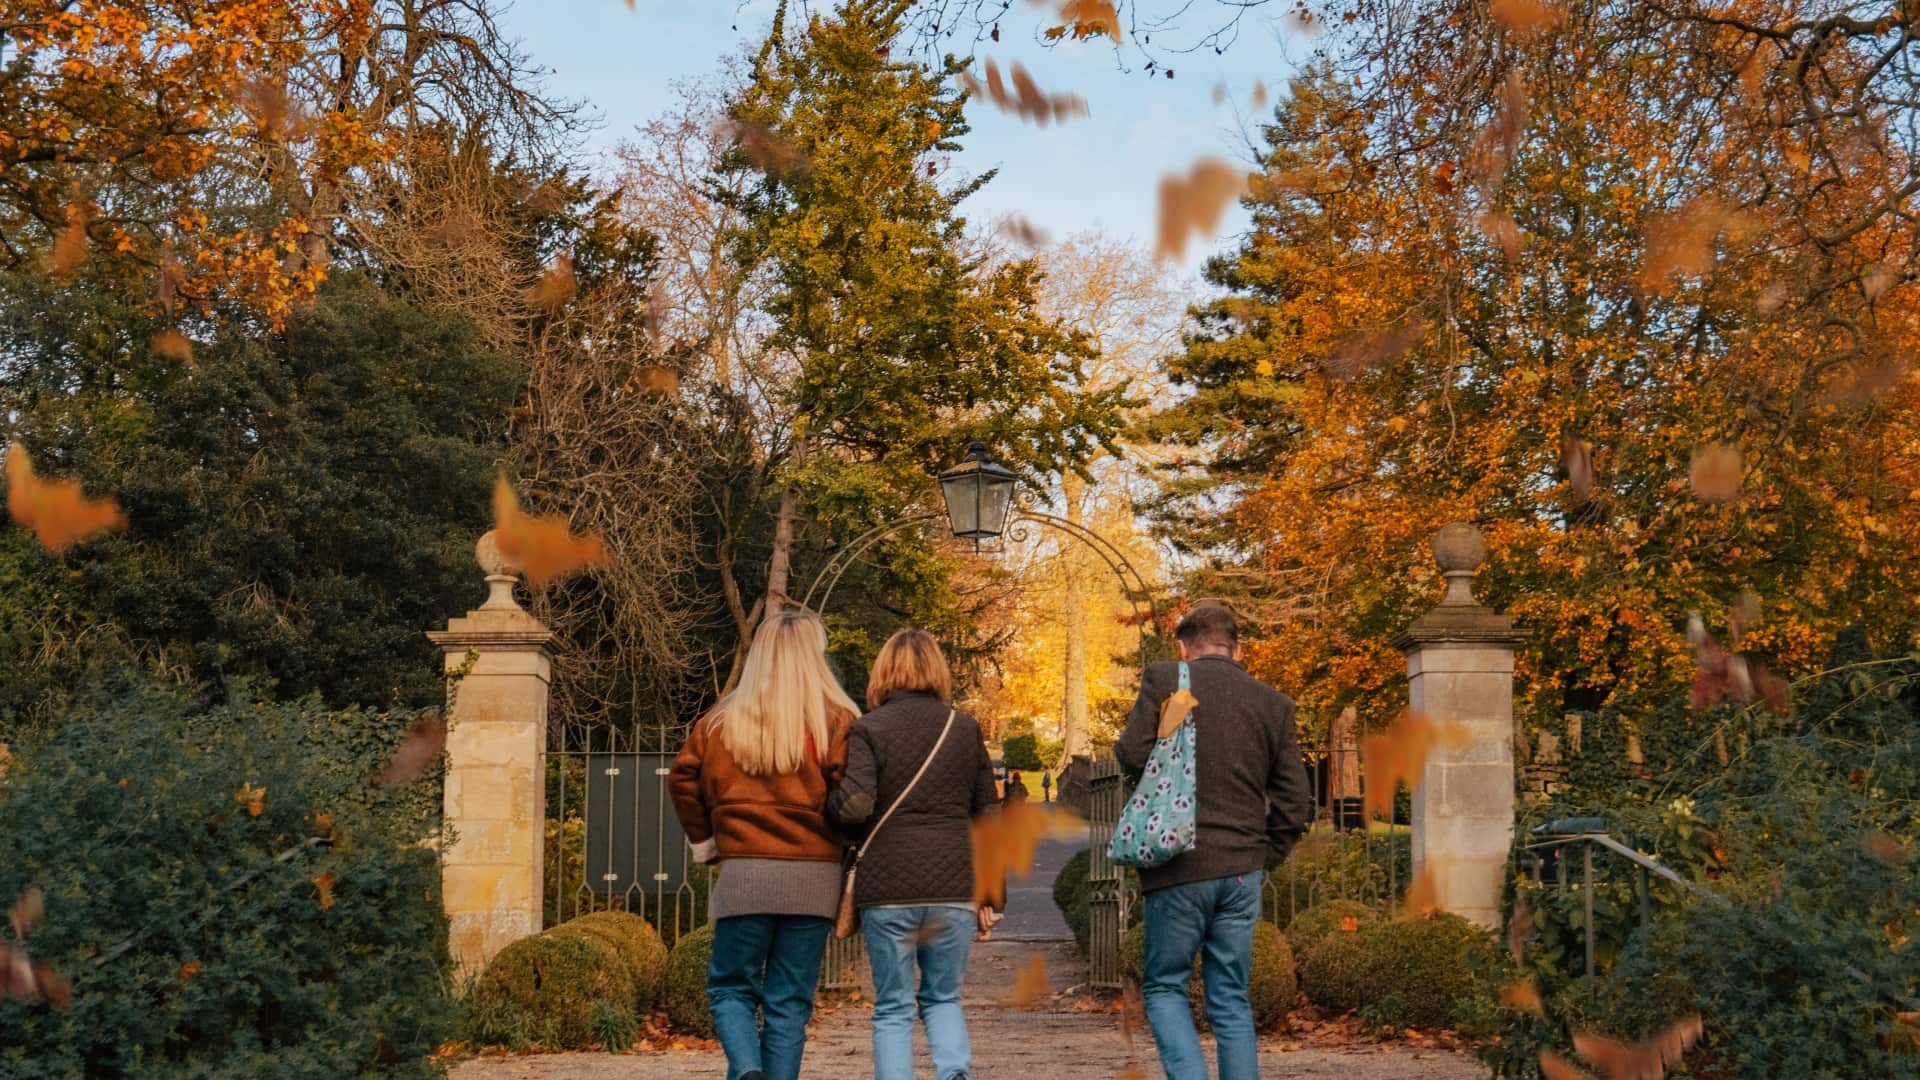 A beautiful autumn location with green, orange and yellow trees. A man, woman and daughter walk head on up the path with their backs to us.